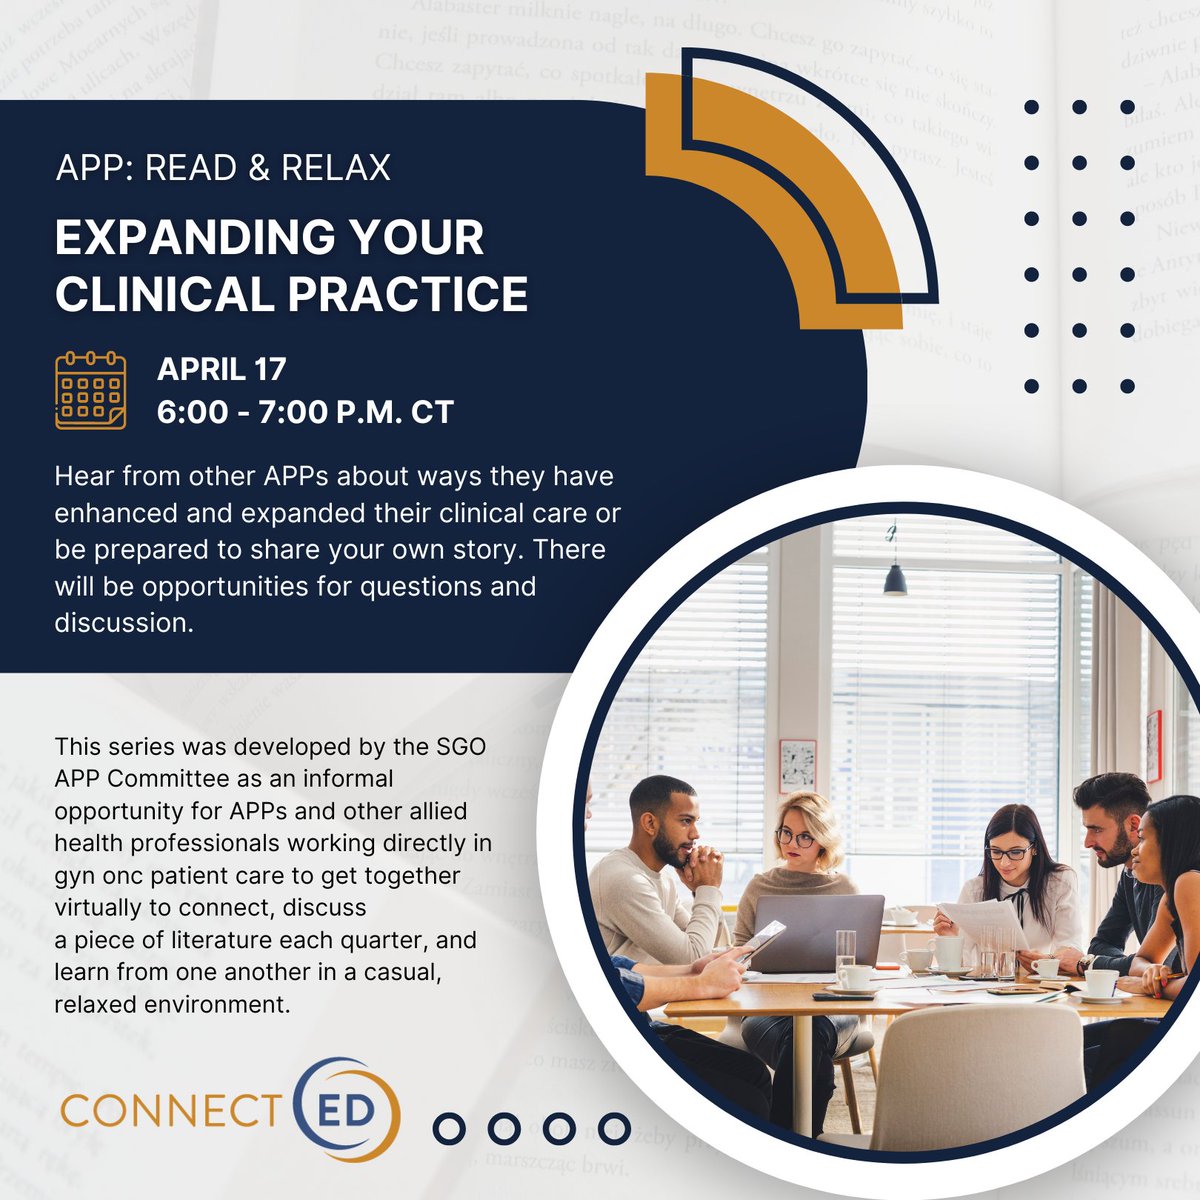 Join us on Wednesday, April 17, for our next APP:R&R session 'Expanding Your Clinical Practice.' During this session, we will discuss expansion methods and ways to overcome some of the challenges associated with expanding your clinical practice. Register: bit.ly/48ZGIRH